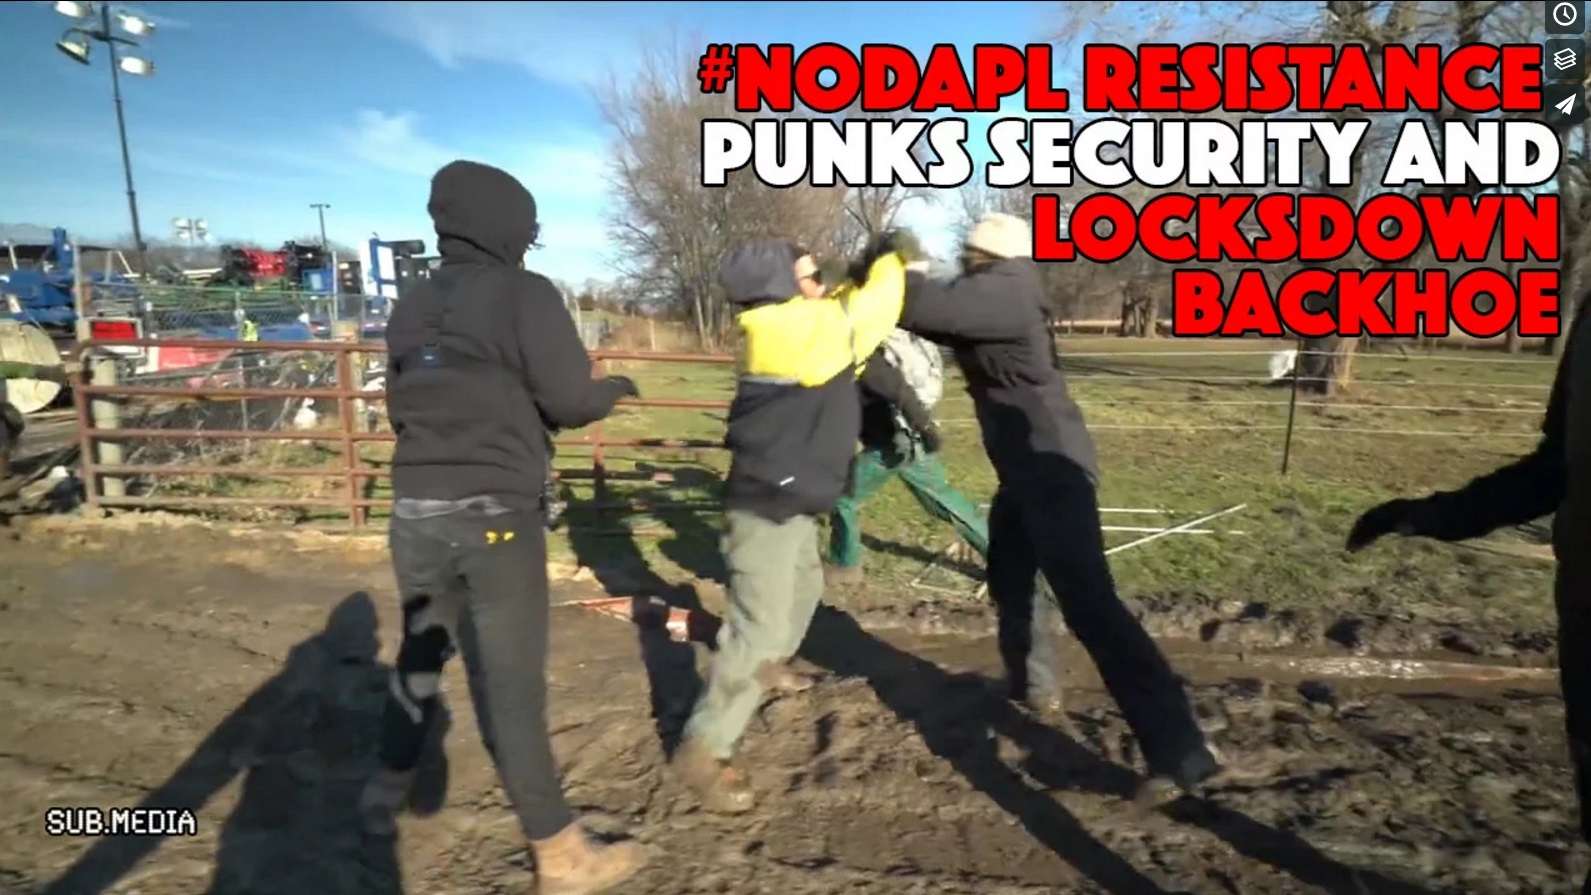 USA: #NODAPL resistance punks security and locks down to backhoe